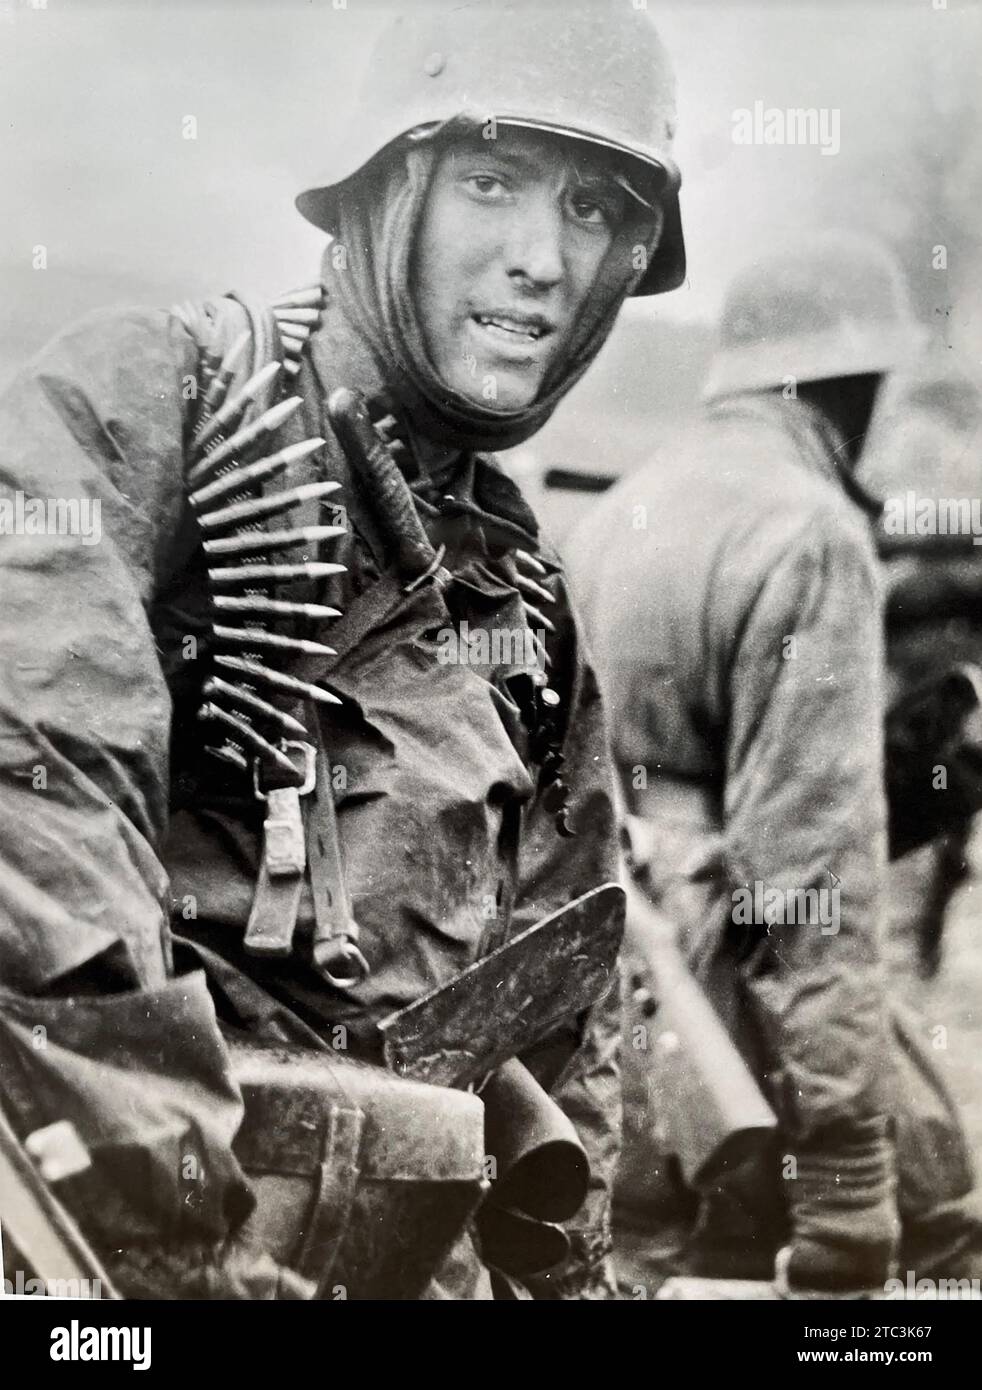 BATTLE OF THE BULGE   16 December  1944- 28 January 1945.  Still from a German film showing  a heavily armed soldier carrying a mortar plate in the Ardennes area of Belgium Stock Photo